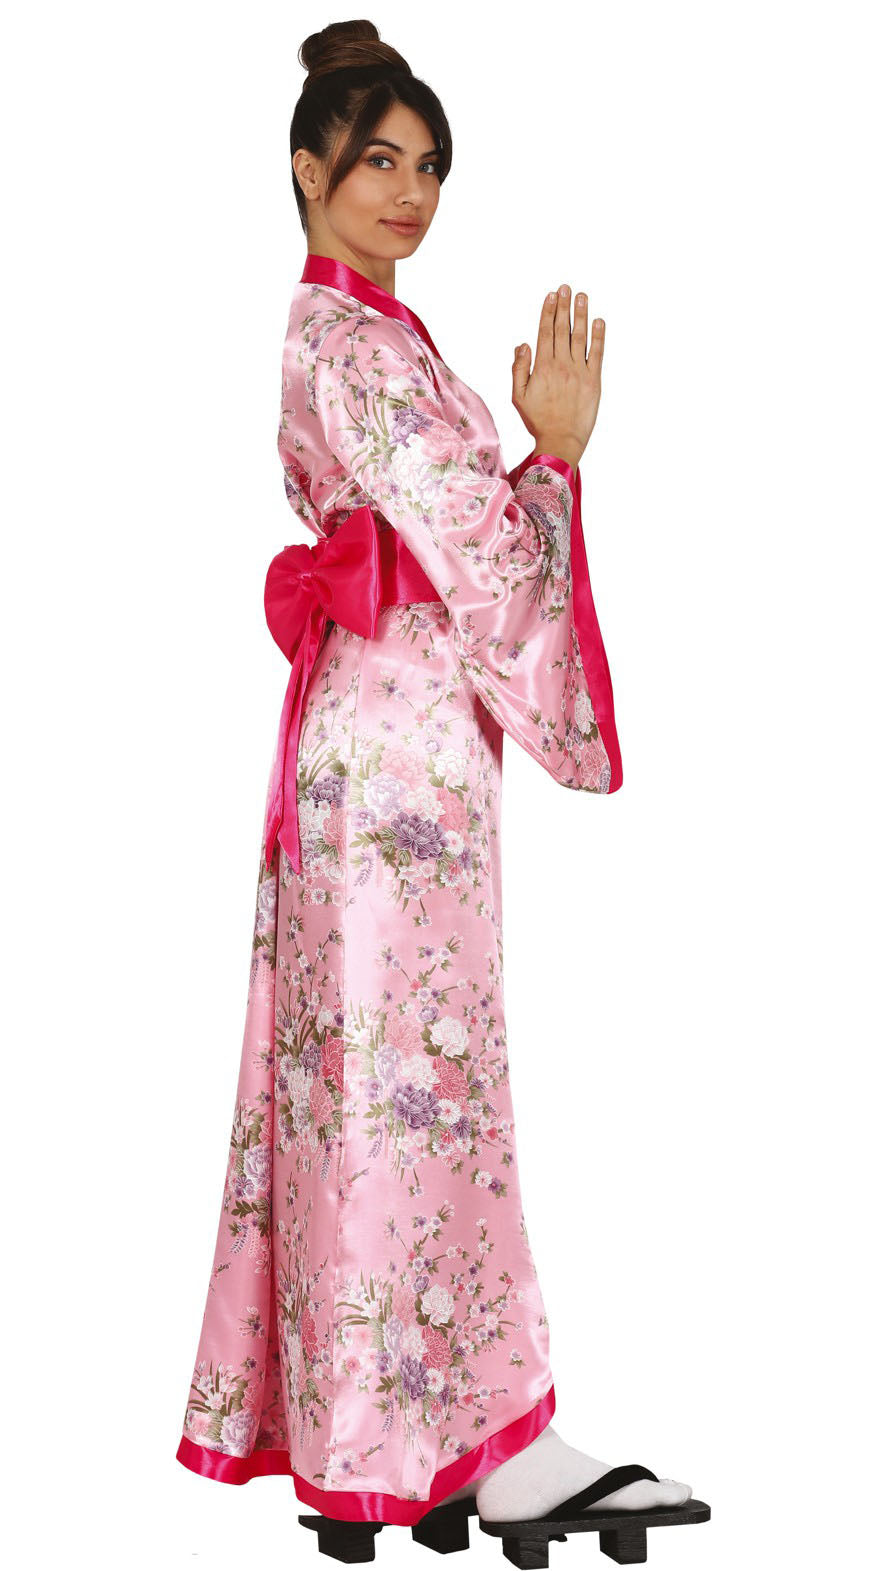 Adult Pink Kimono includes robe and belt